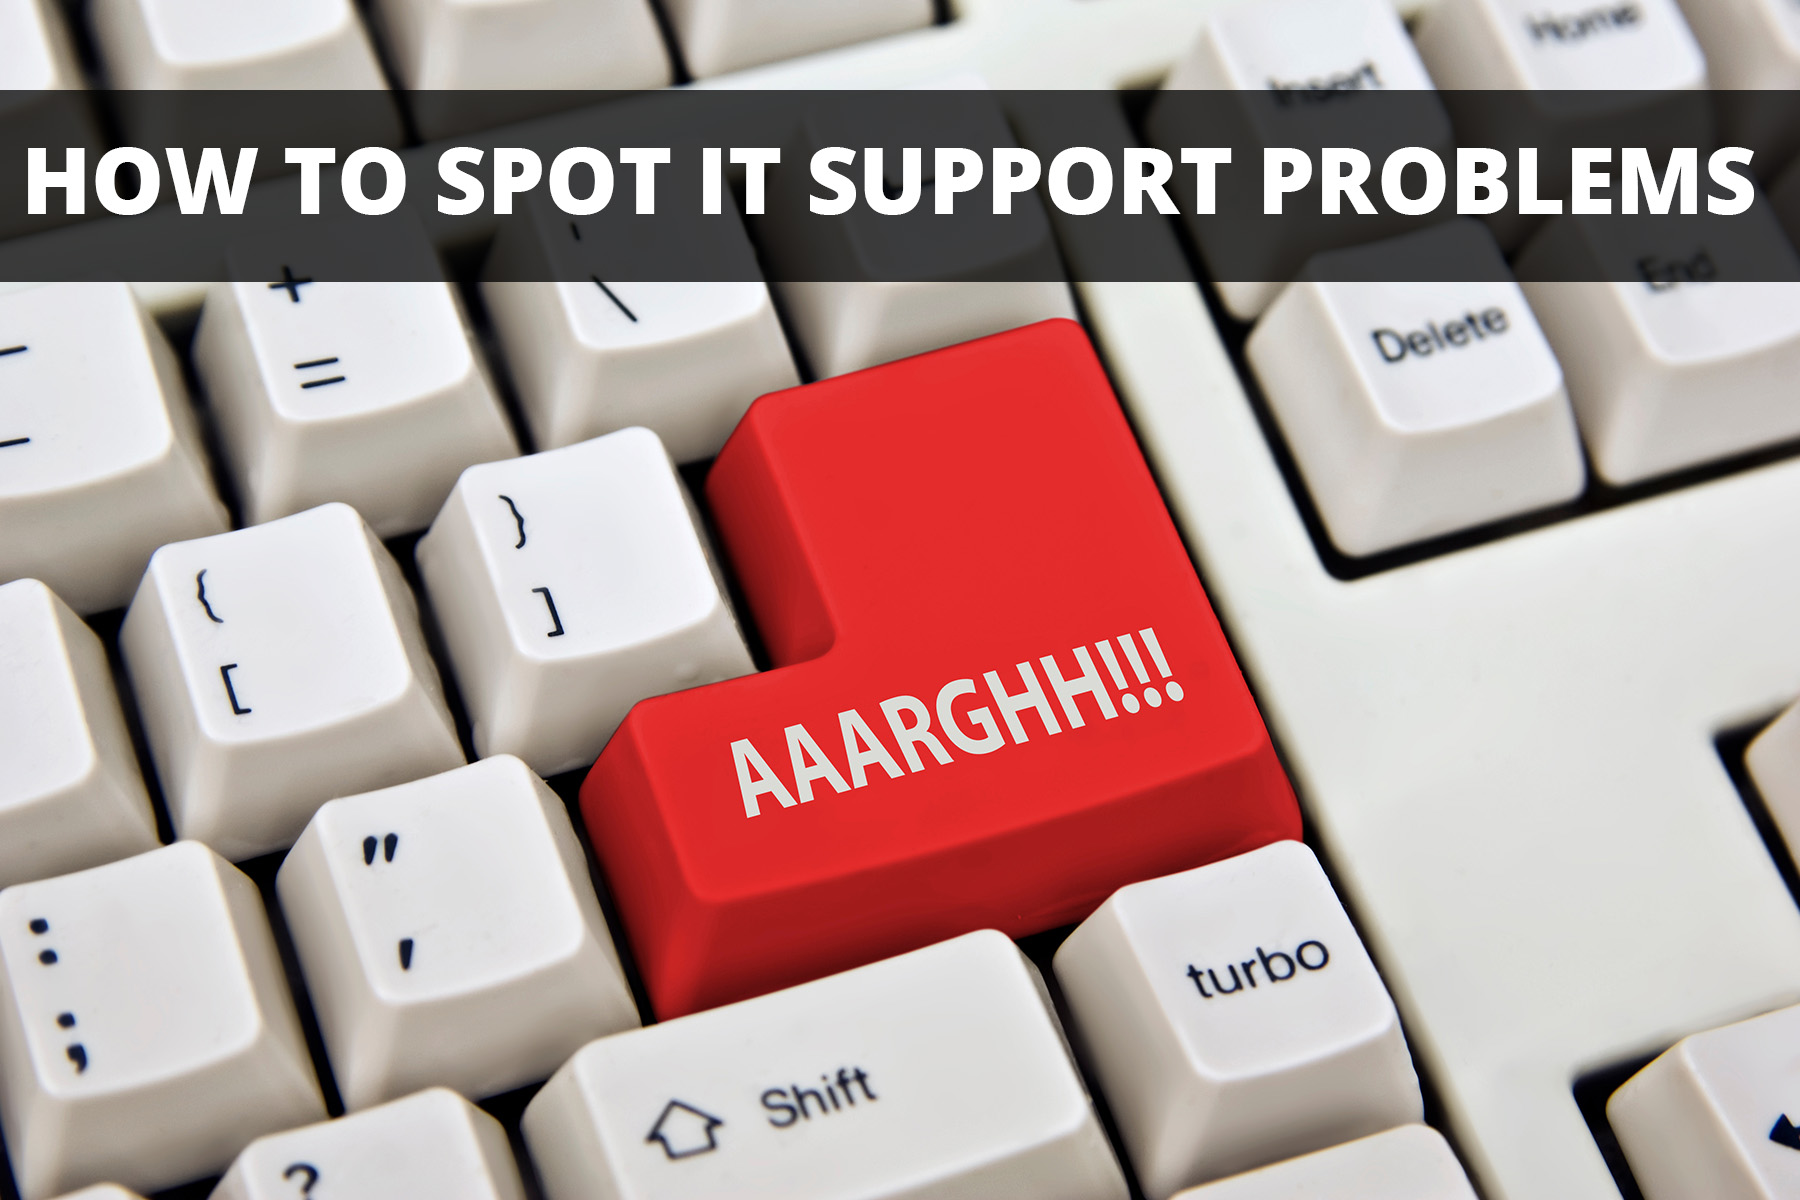 Spot IT Support Problems